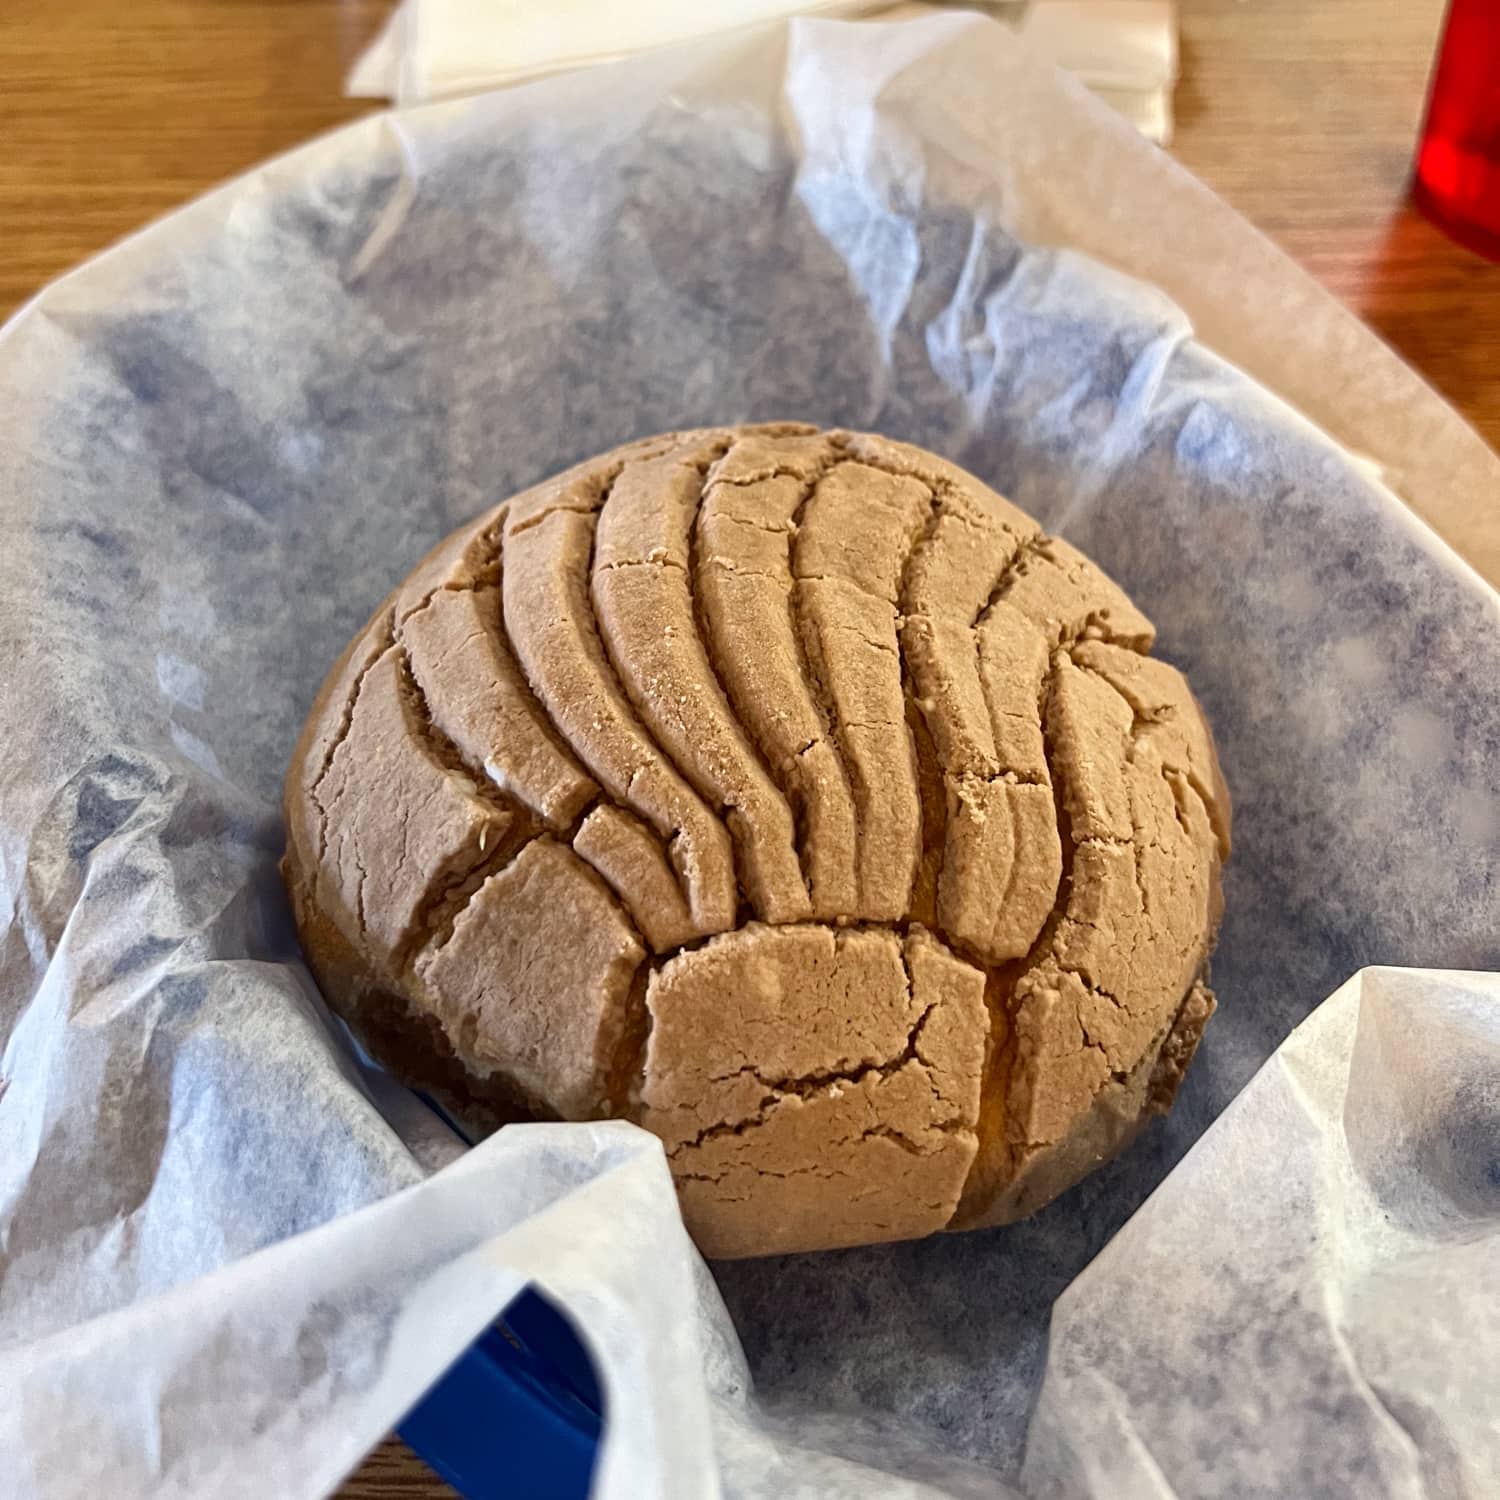 Pan dulce at Joe's Bakery and Coffee Shop in East Austin